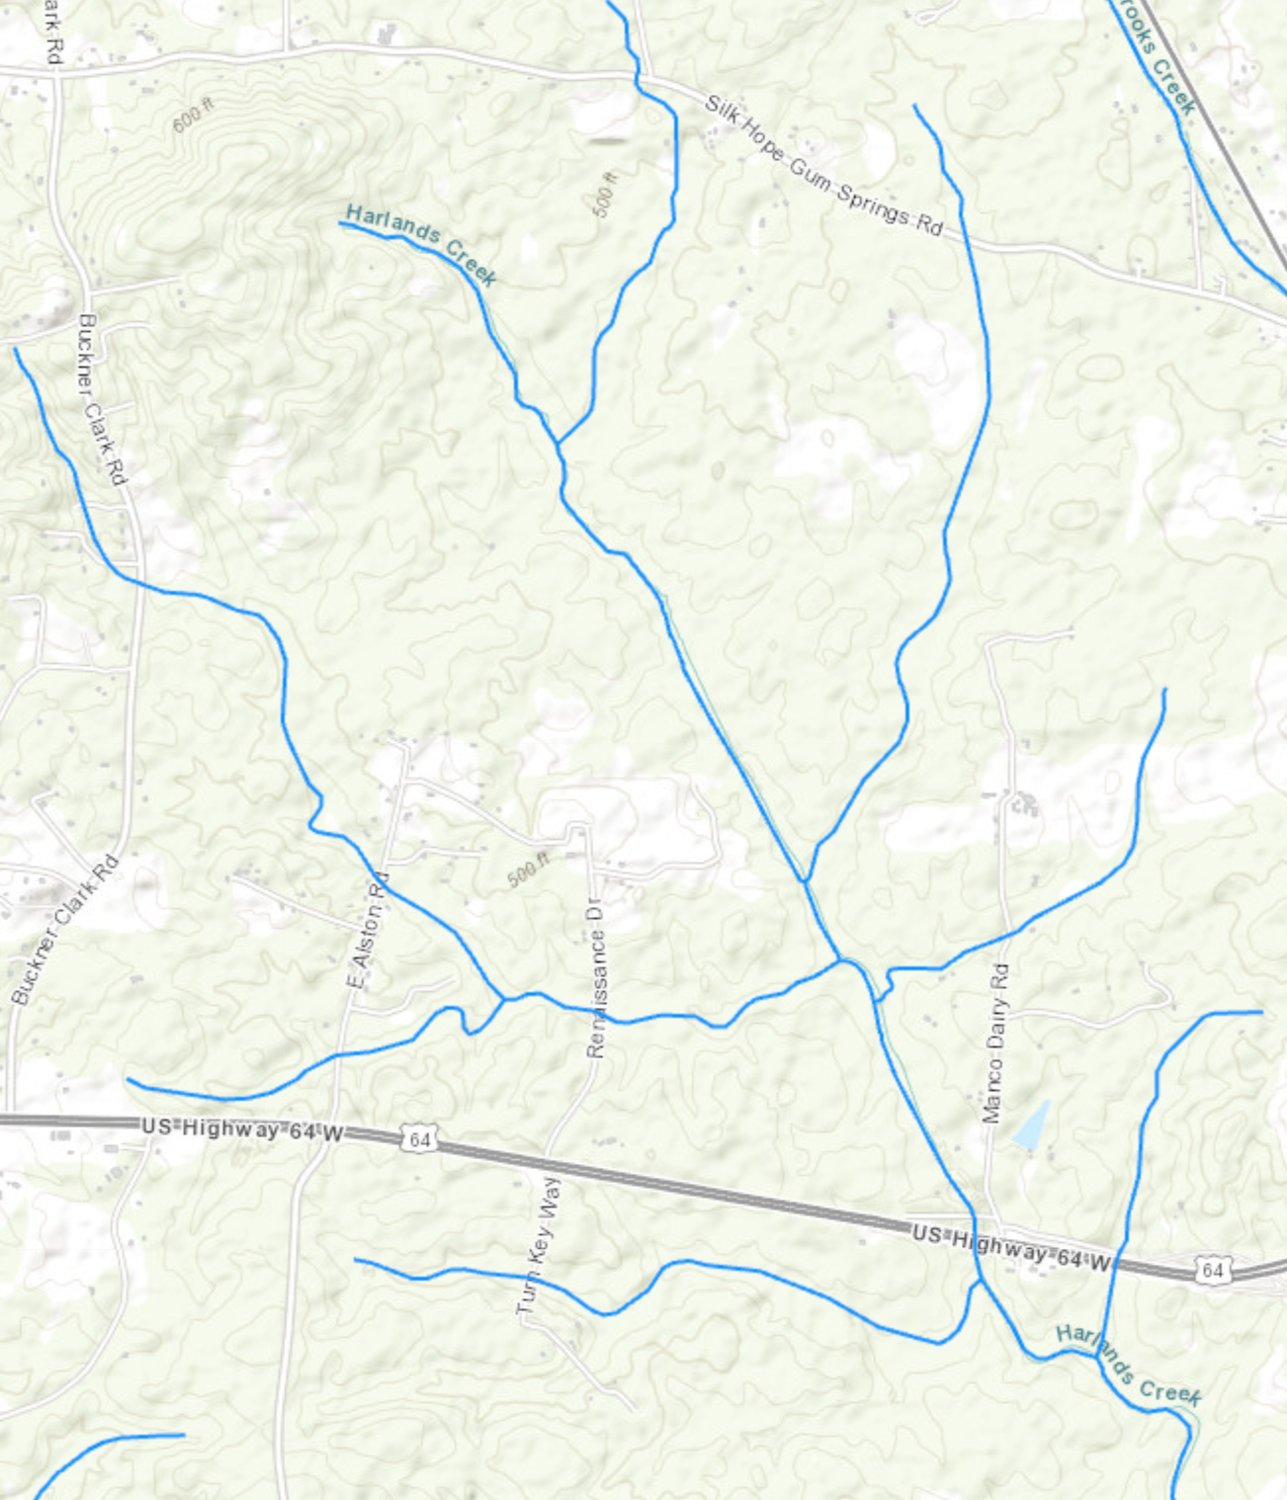 Map of Harlands Creek. The discharge occurred approximately 800 feet east of Renaissance Drive in Pittsboro, untreated wastewater then flowed into Harlands Creek.